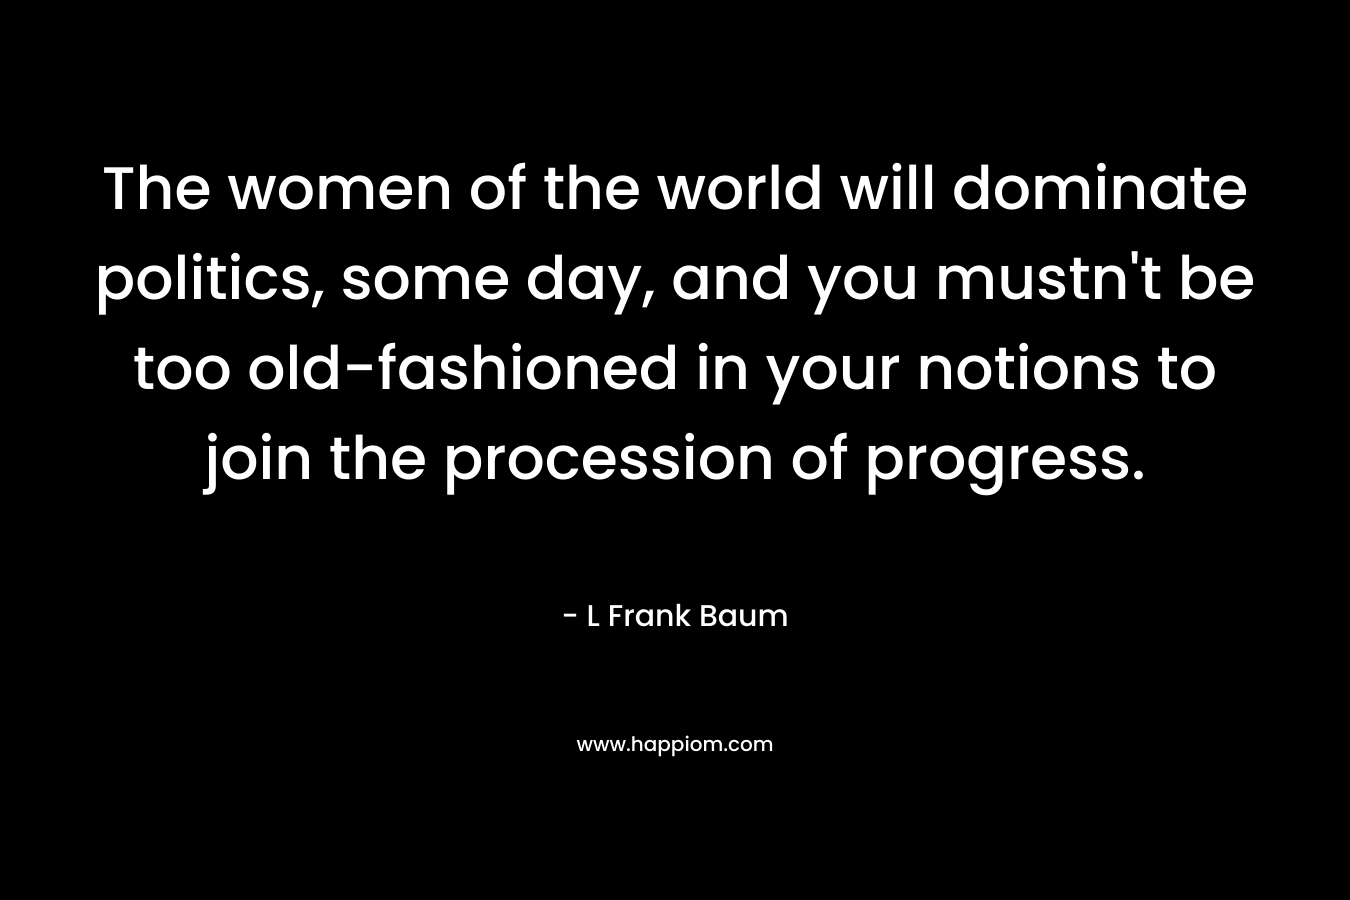 The women of the world will dominate politics, some day, and you mustn't be too old-fashioned in your notions to join the procession of progress.